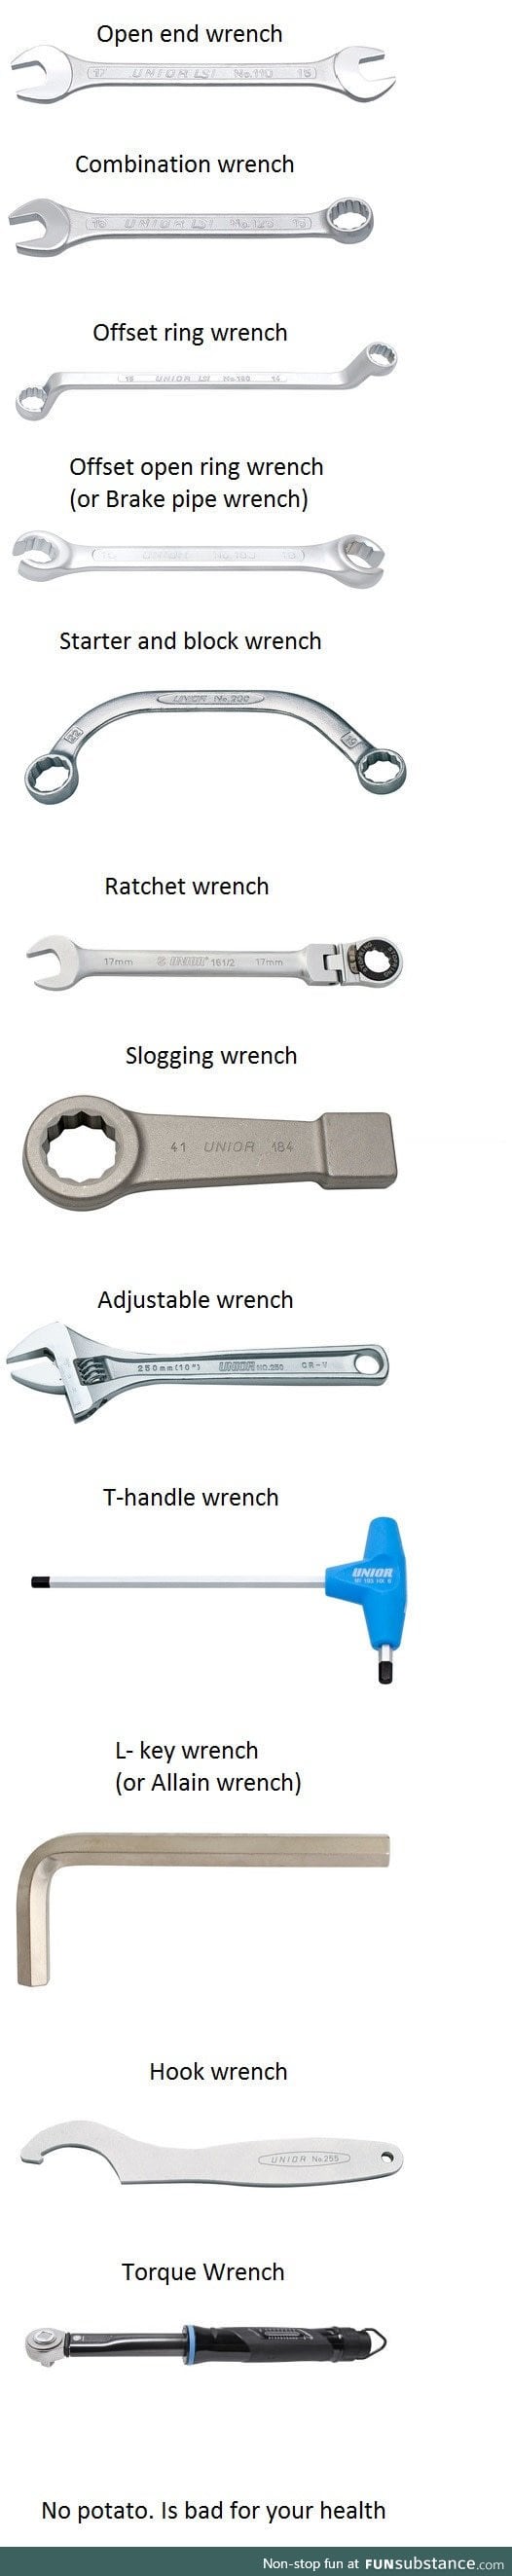 The great family of wrenches